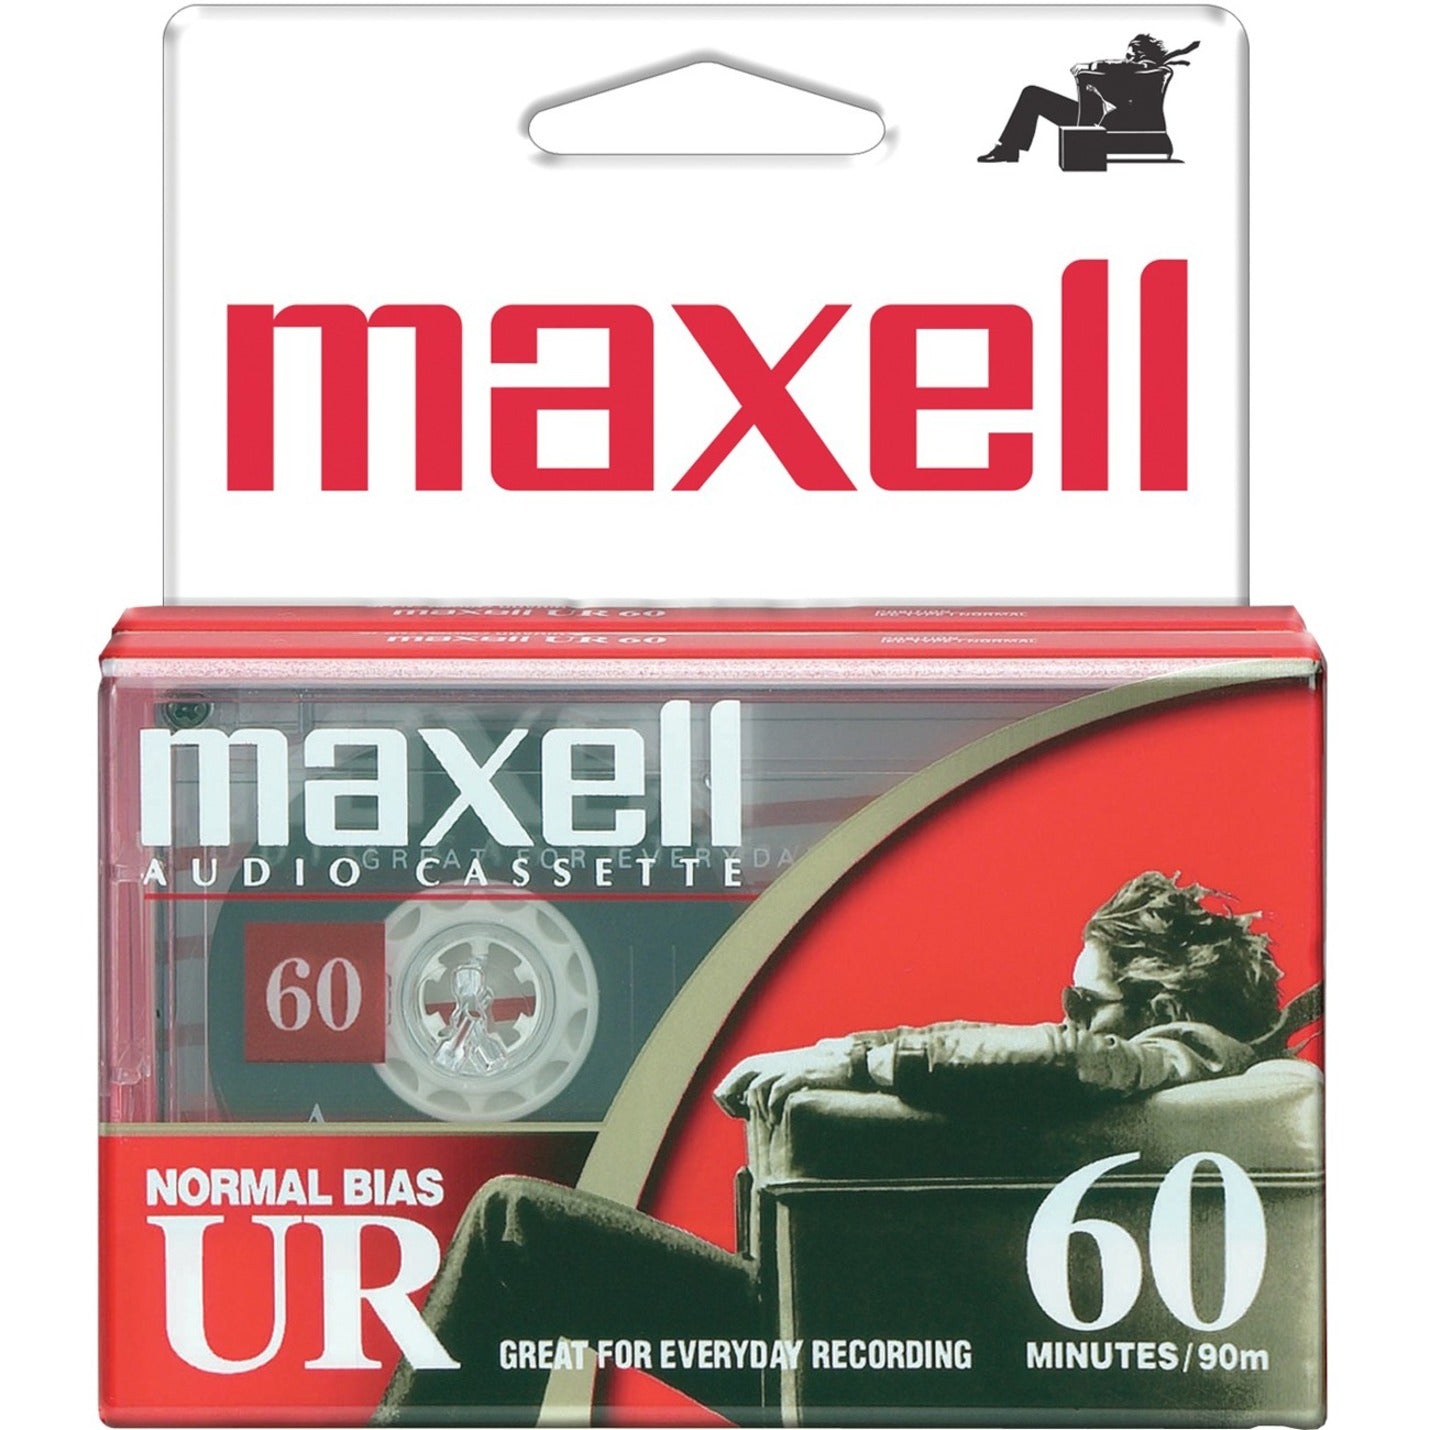 Maxell 109024 UR60 Cassette Tape (2 Pack), 60 Minute Storage Capacity, Normal BIAS